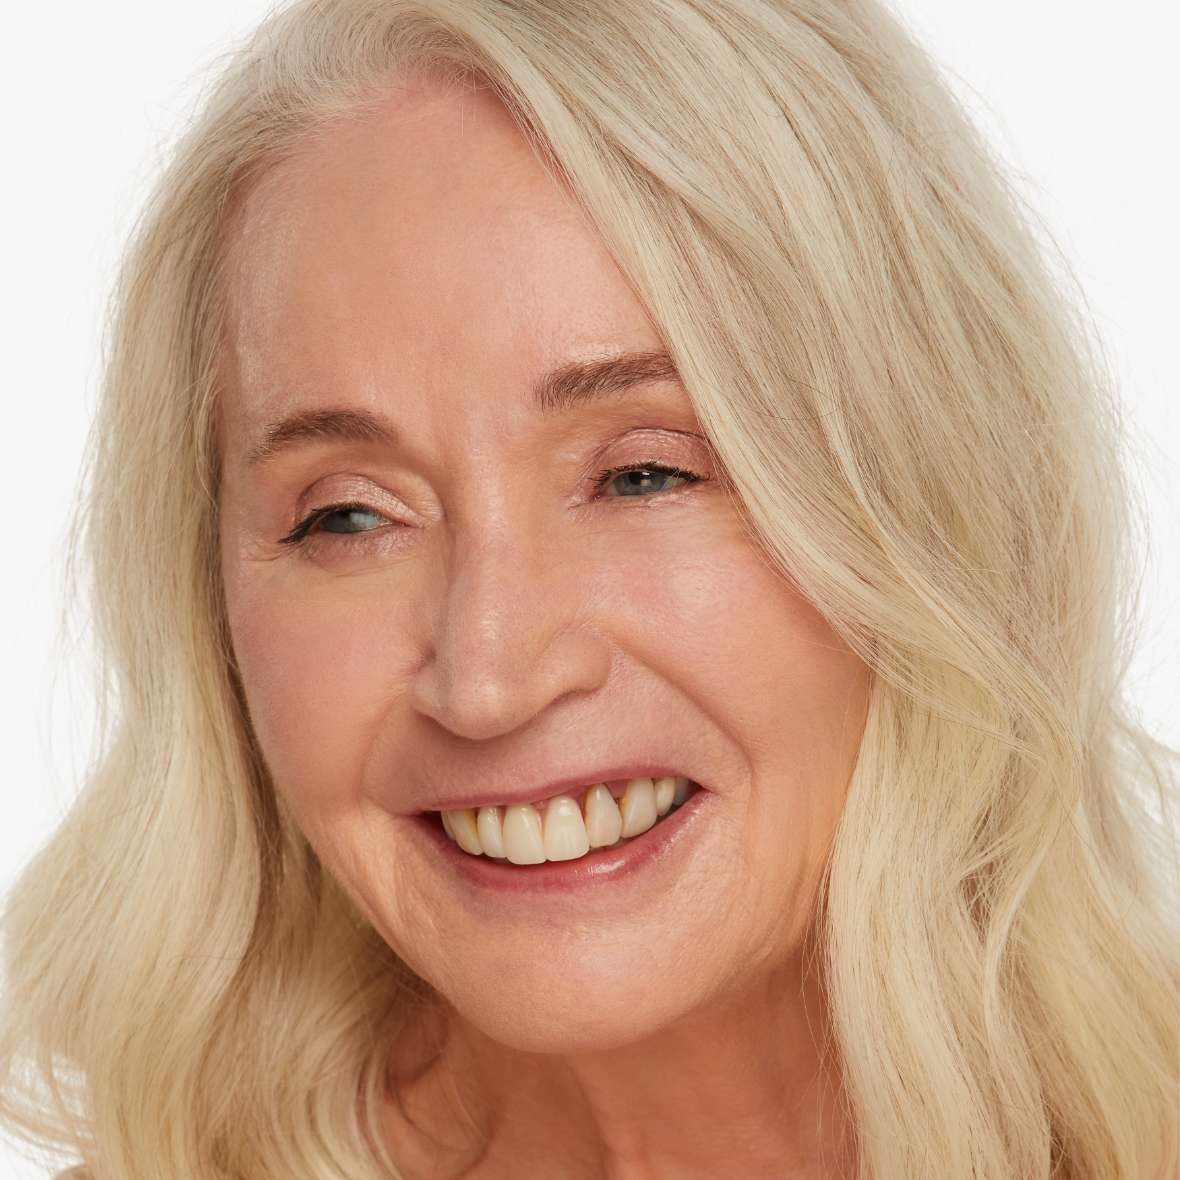 How to look after your skin in your 60s